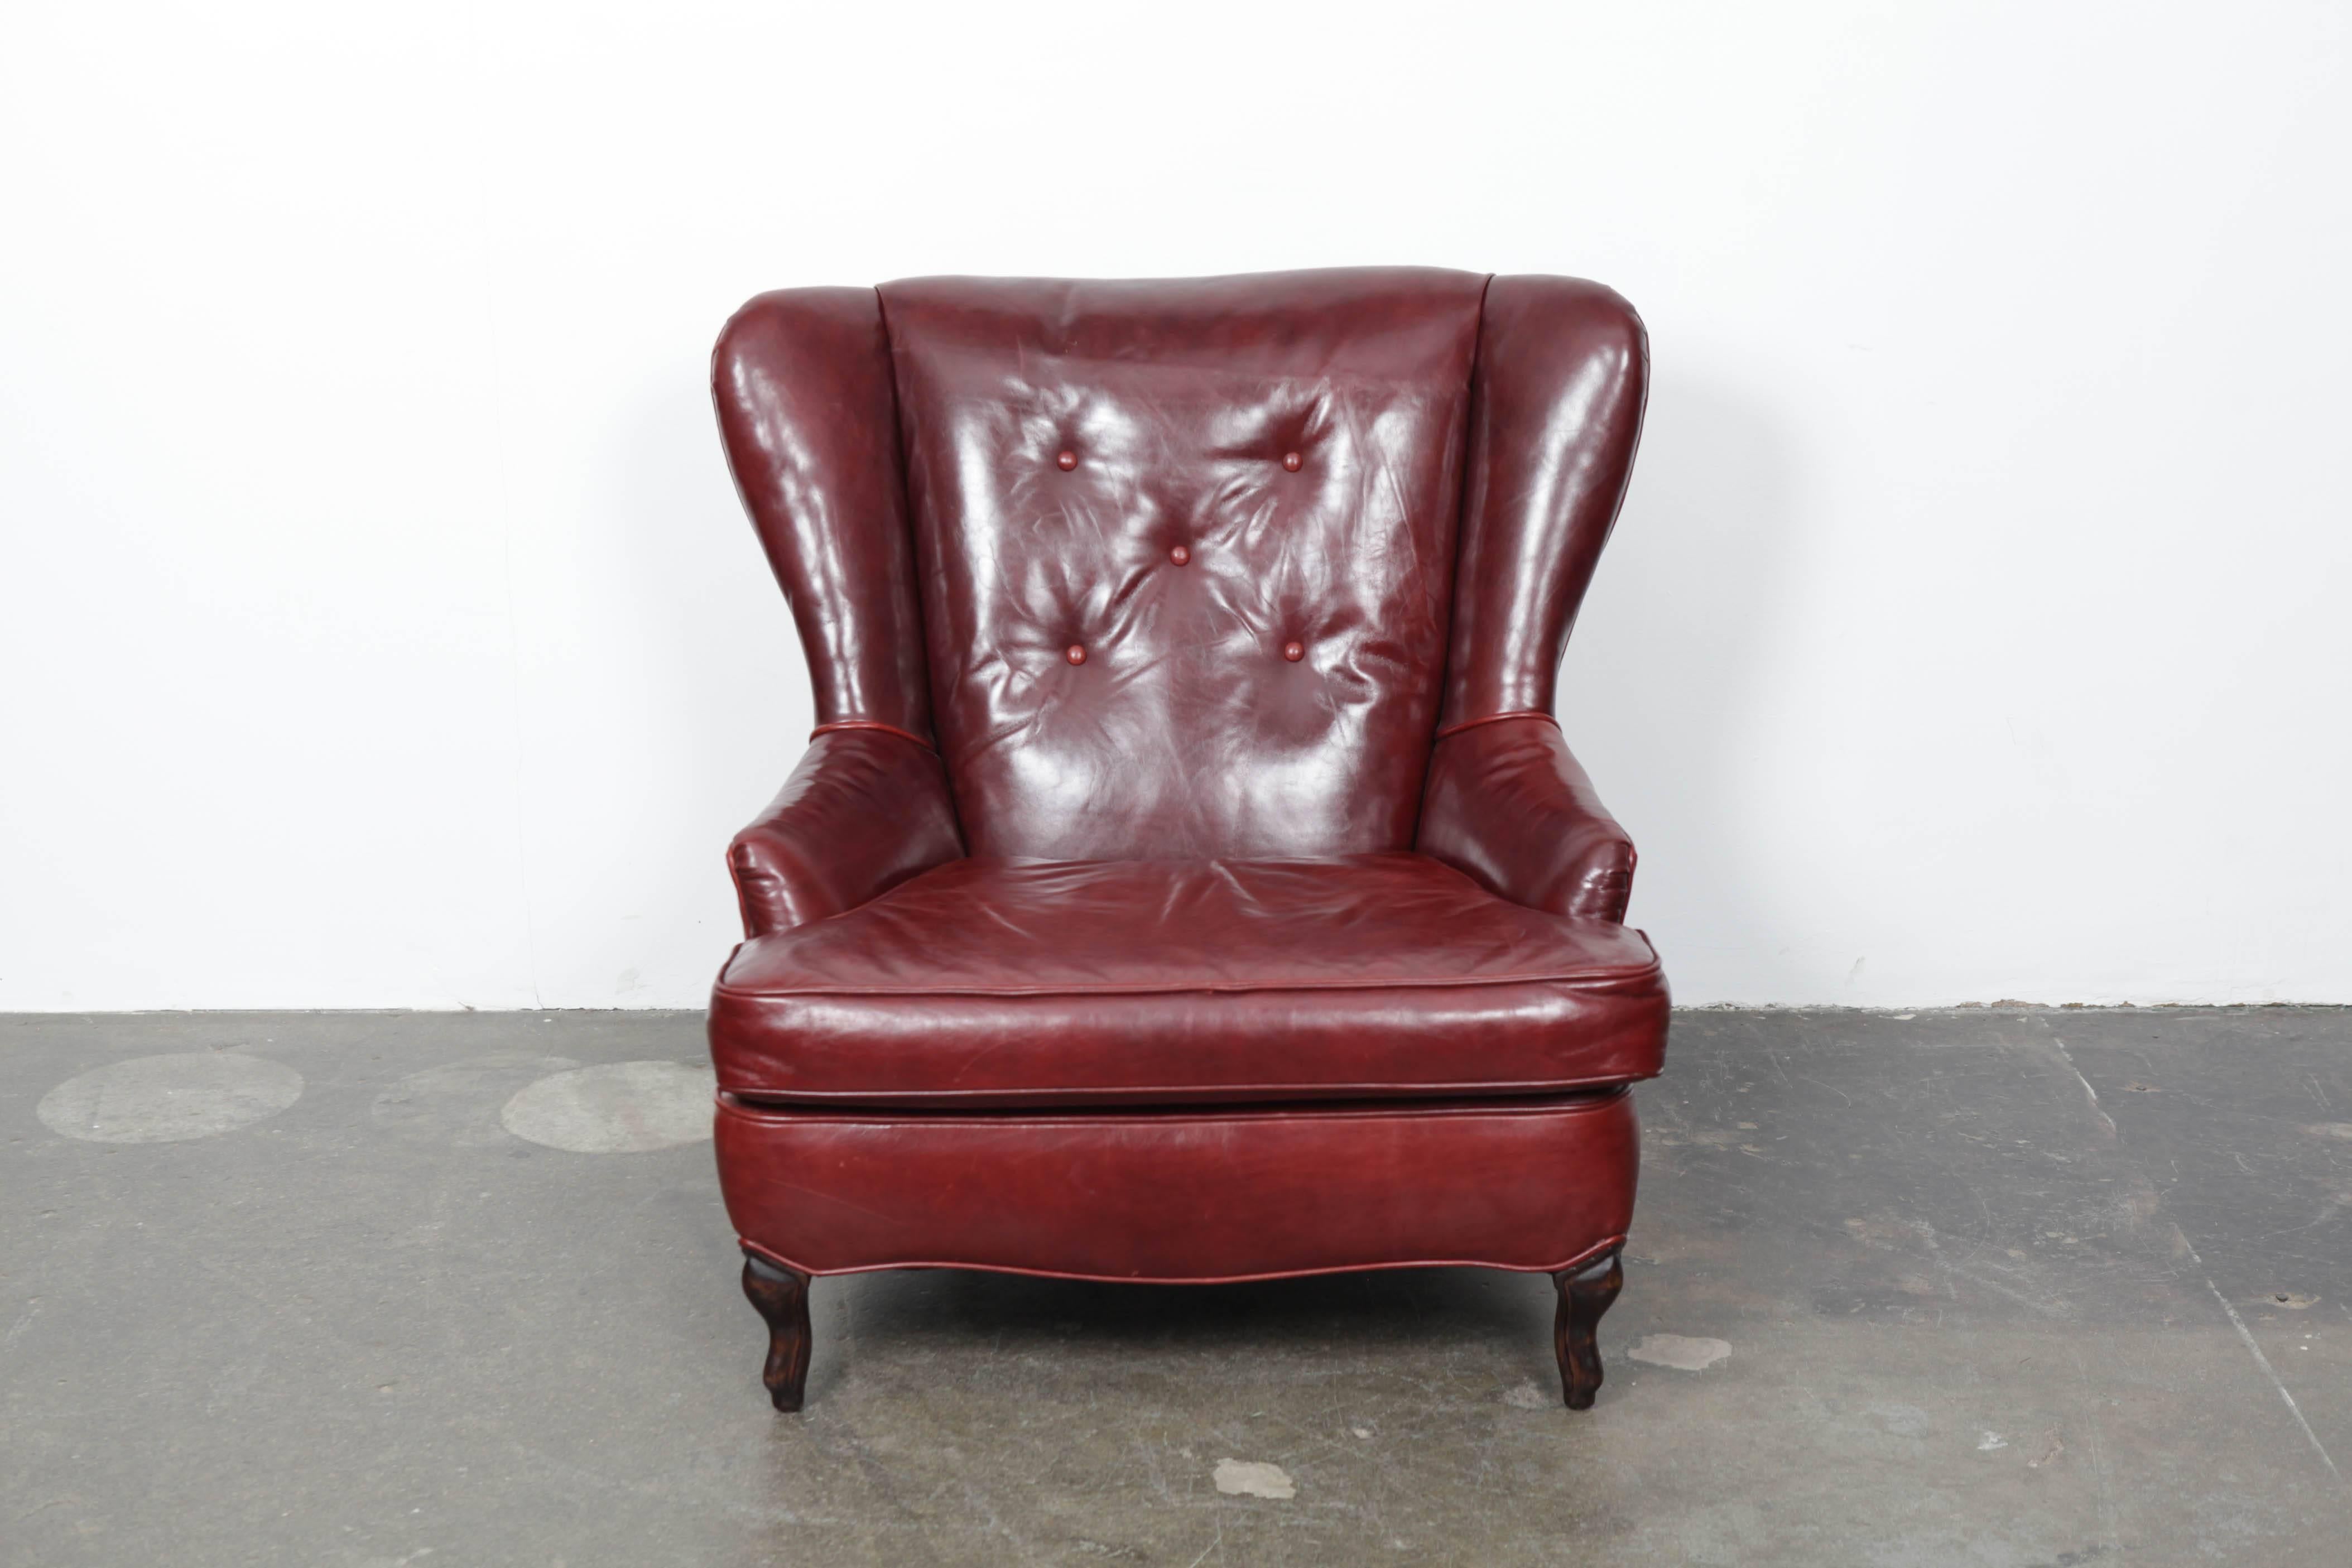 American made oxblood leather wing back chair with excellent patina and wear, walnut legs (cabriole legs in front and curved back legs) and a button tufted back cushion.  Sizeable chair. 